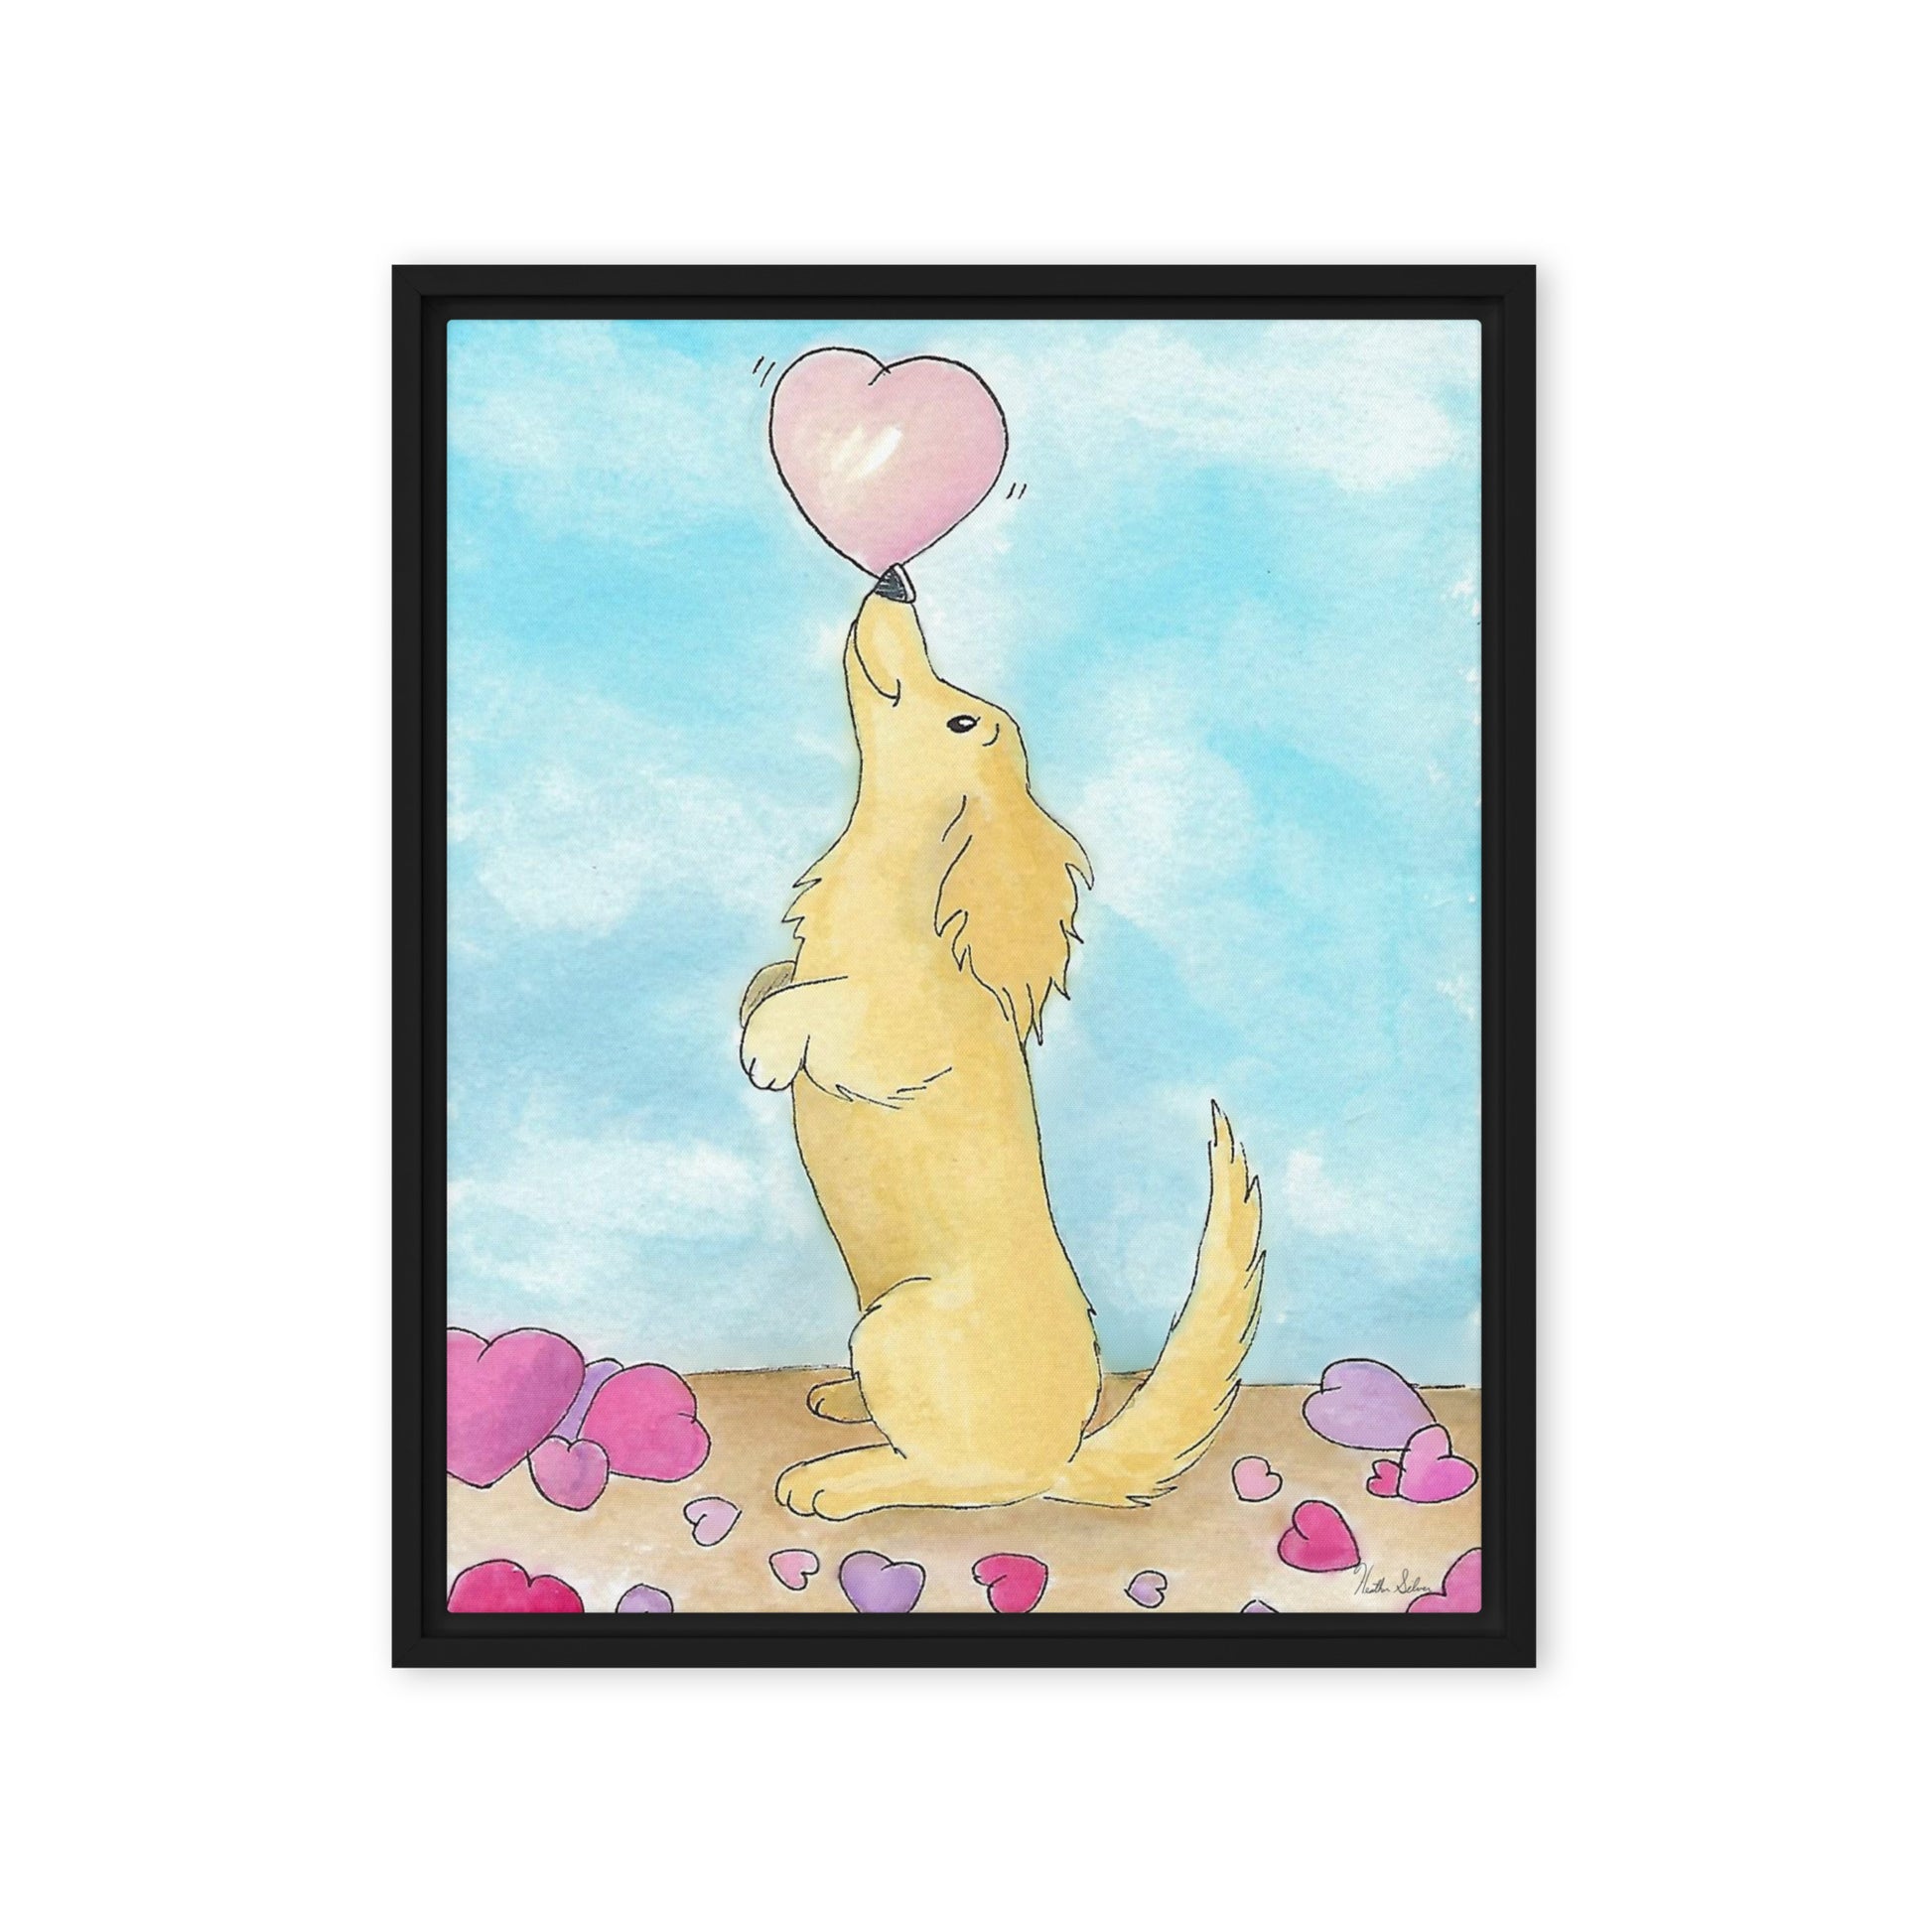 16 by 20 inch framed canvas Puppy Love print. The canvas is in a black pine wood frame.